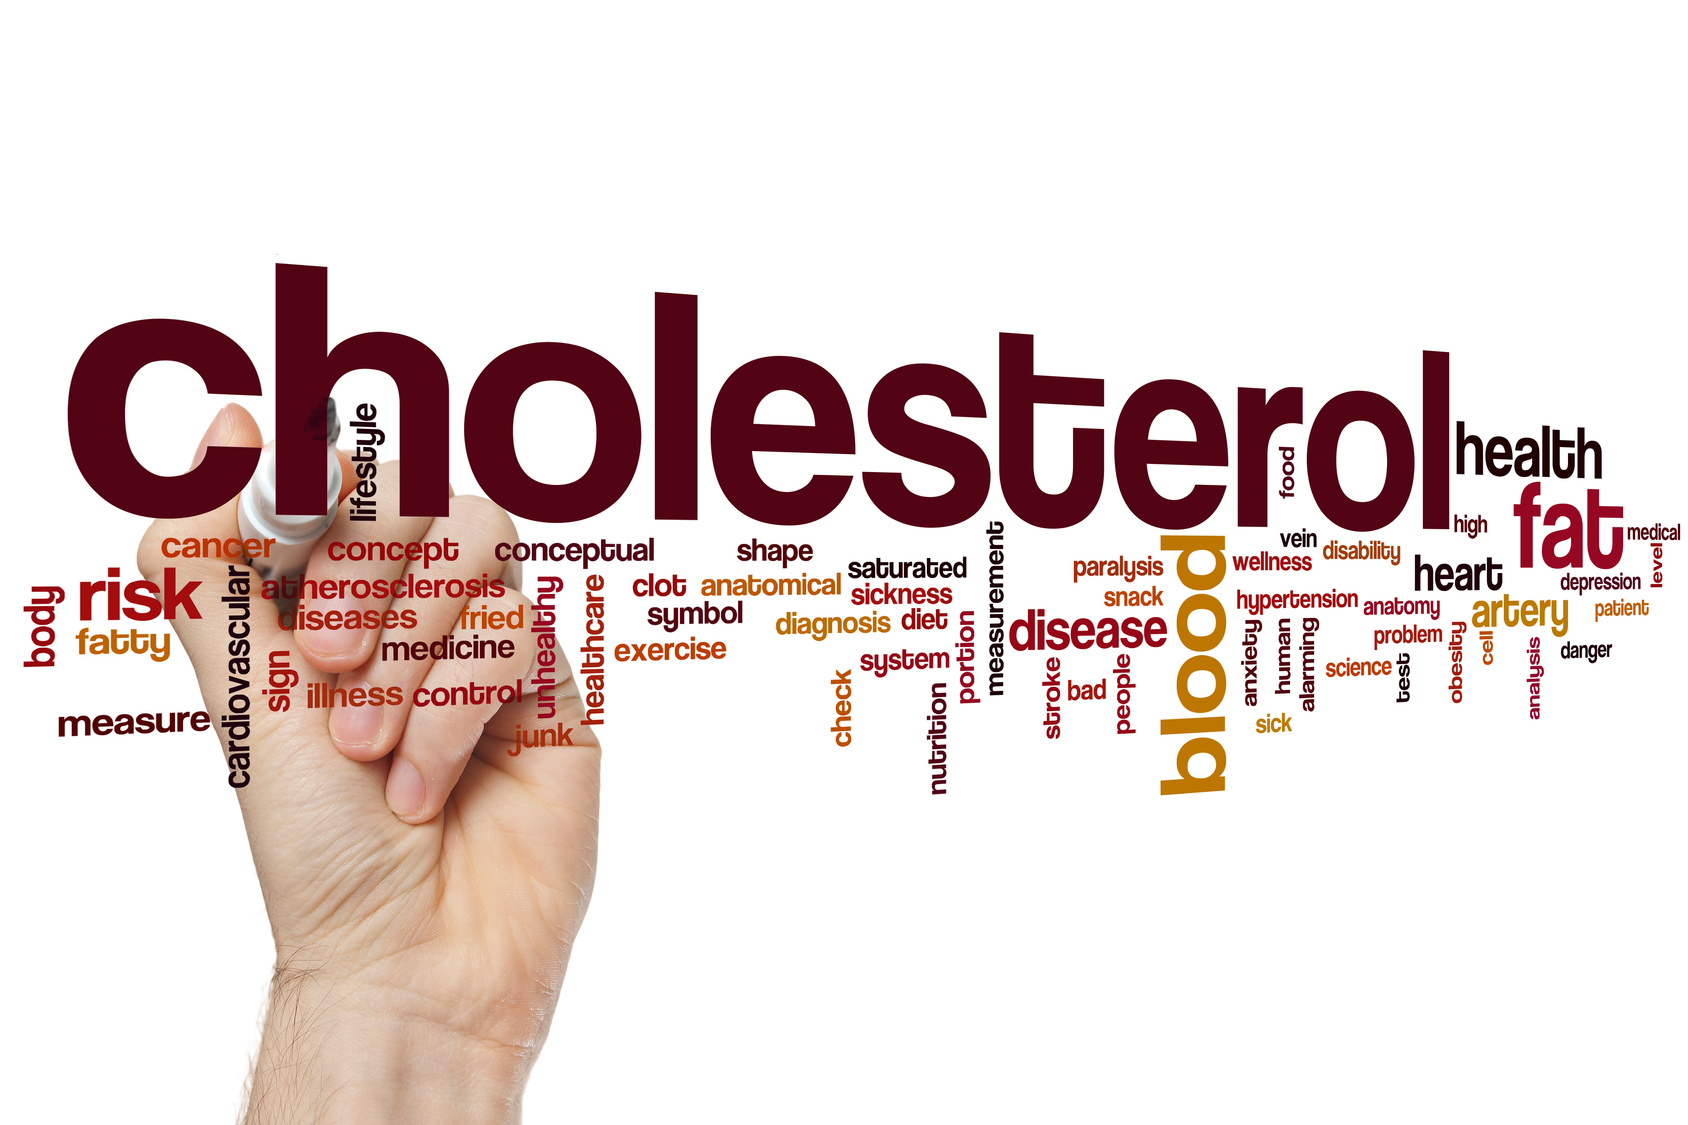 Lower your cholesterol with these healthy lifestyle changes